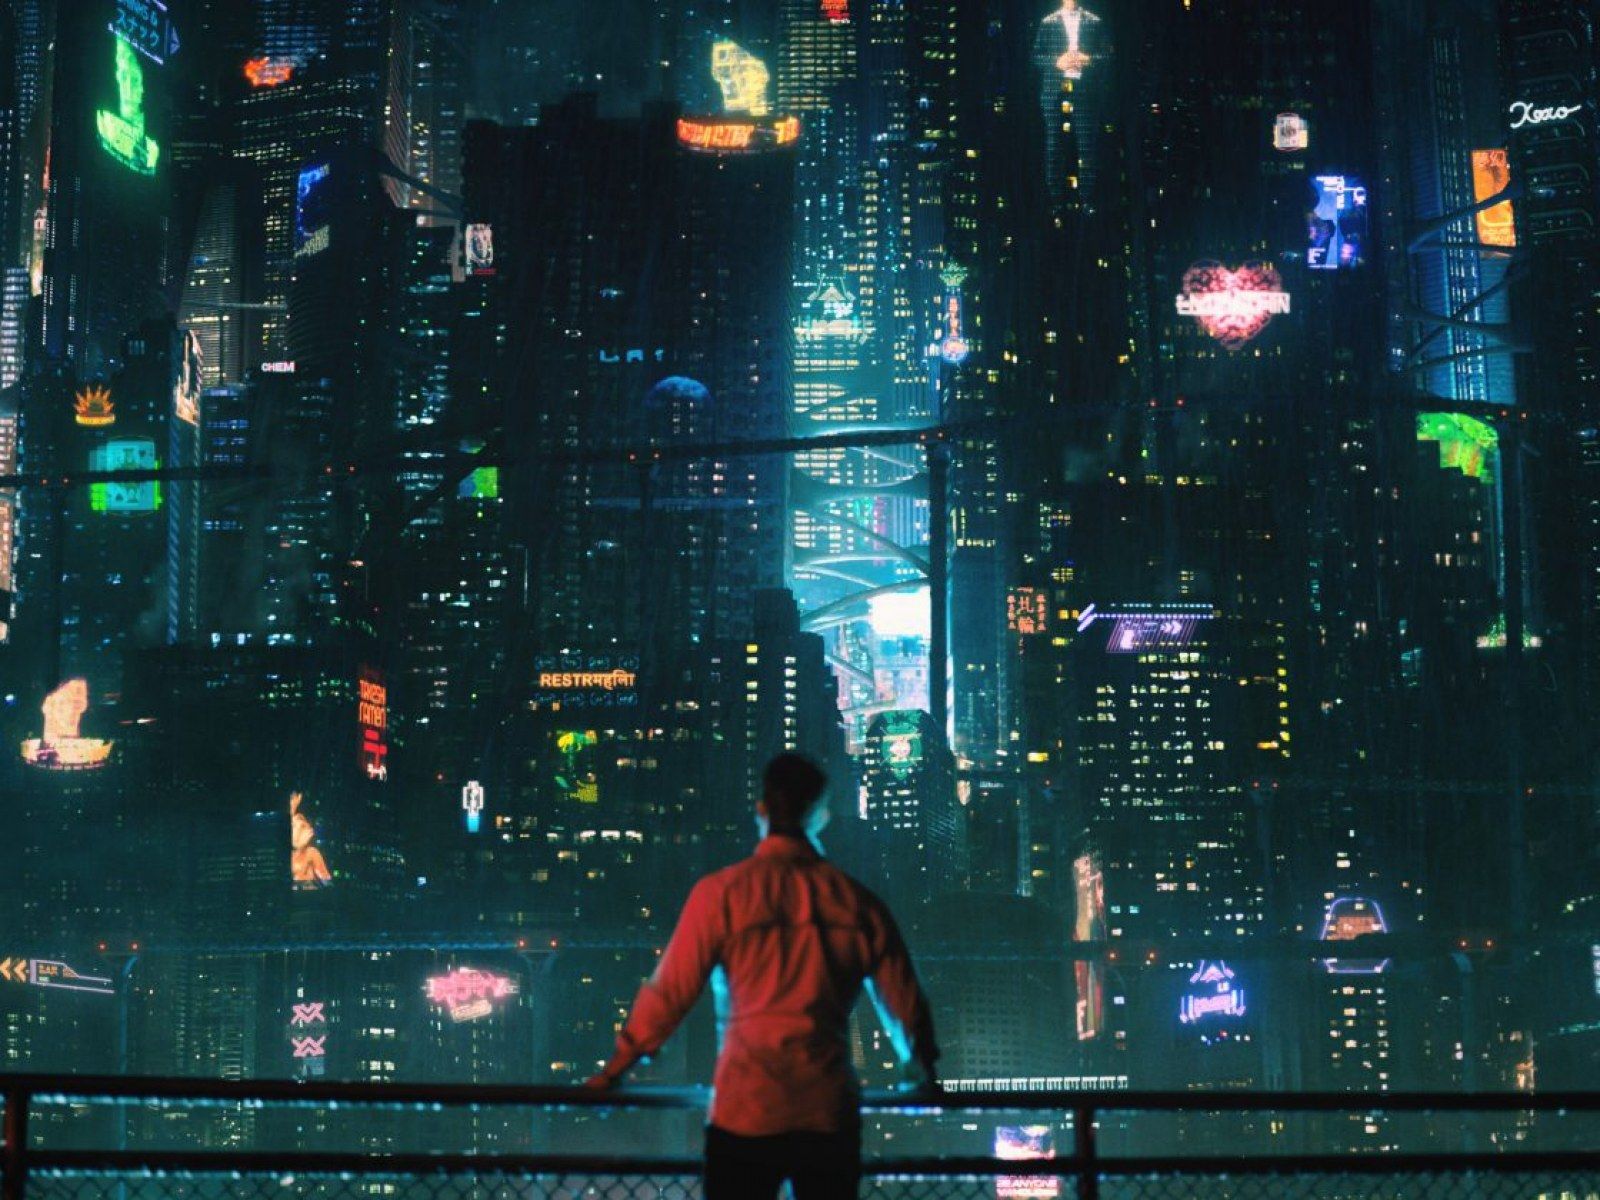 Altered Carbon' Season 2 Release Date & Episode List Revealed, Led By Anthony Mackie